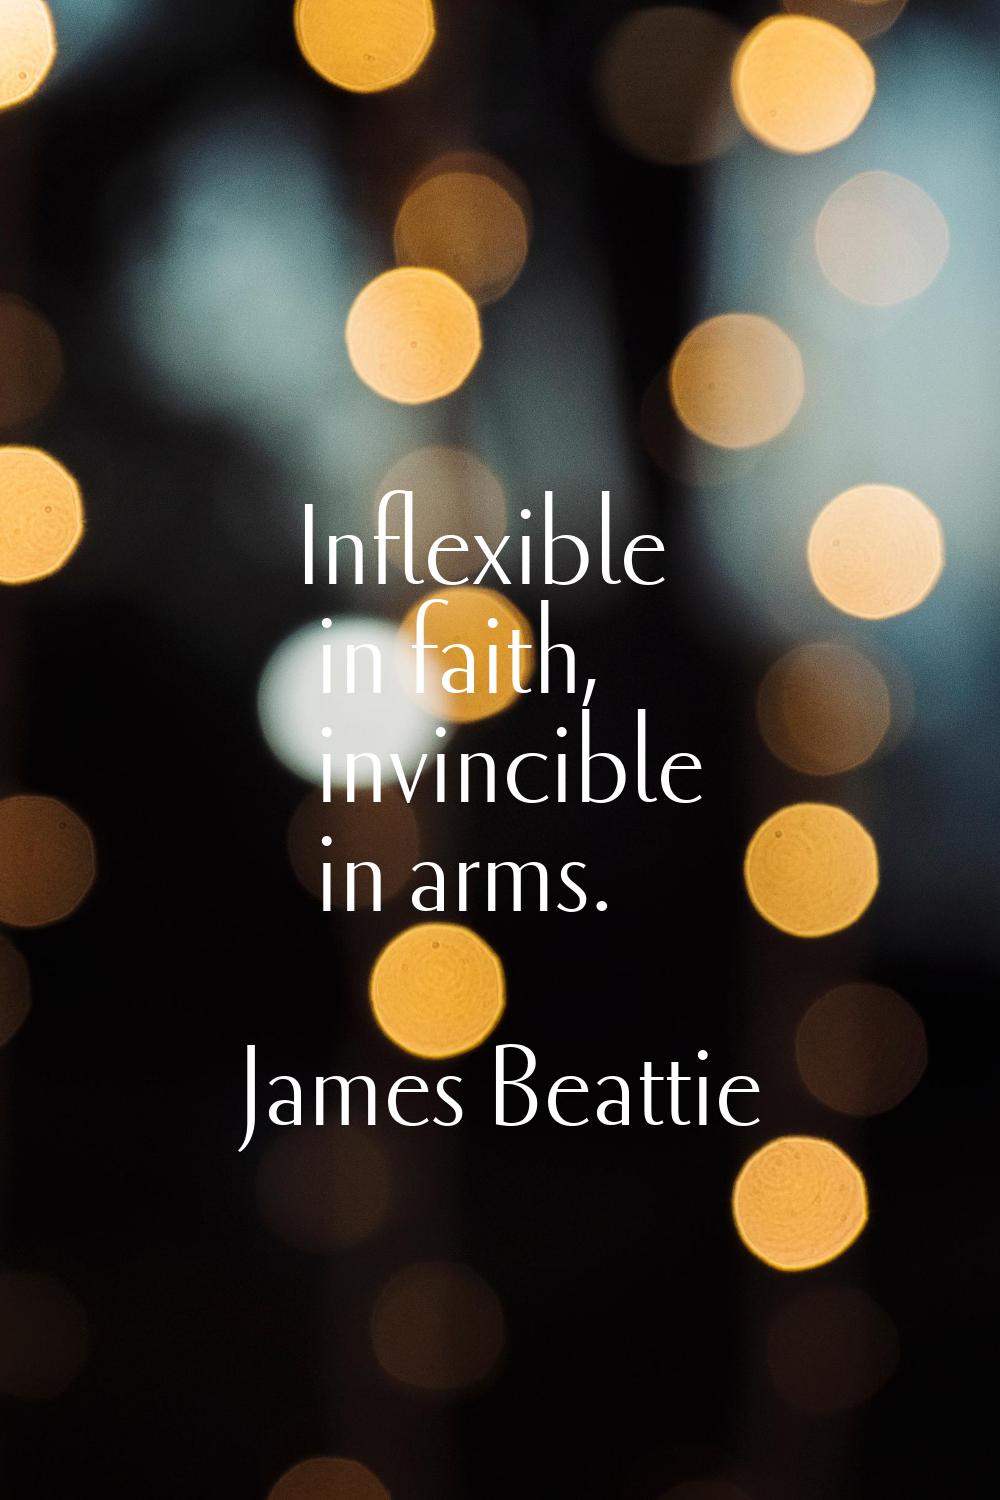 Inflexible in faith, invincible in arms.